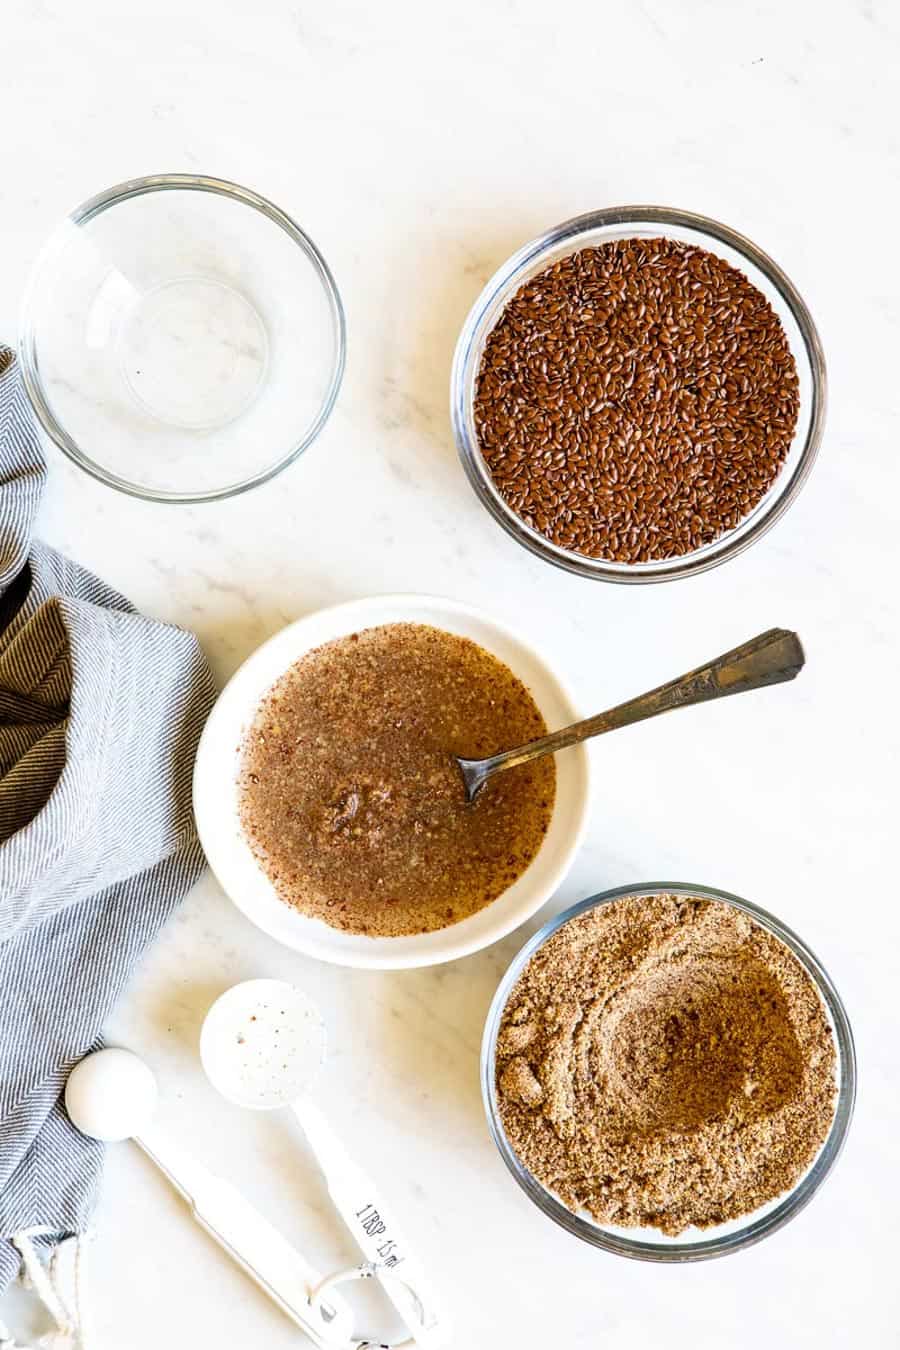 ground flax seeds in bowls with water and spoon to soak